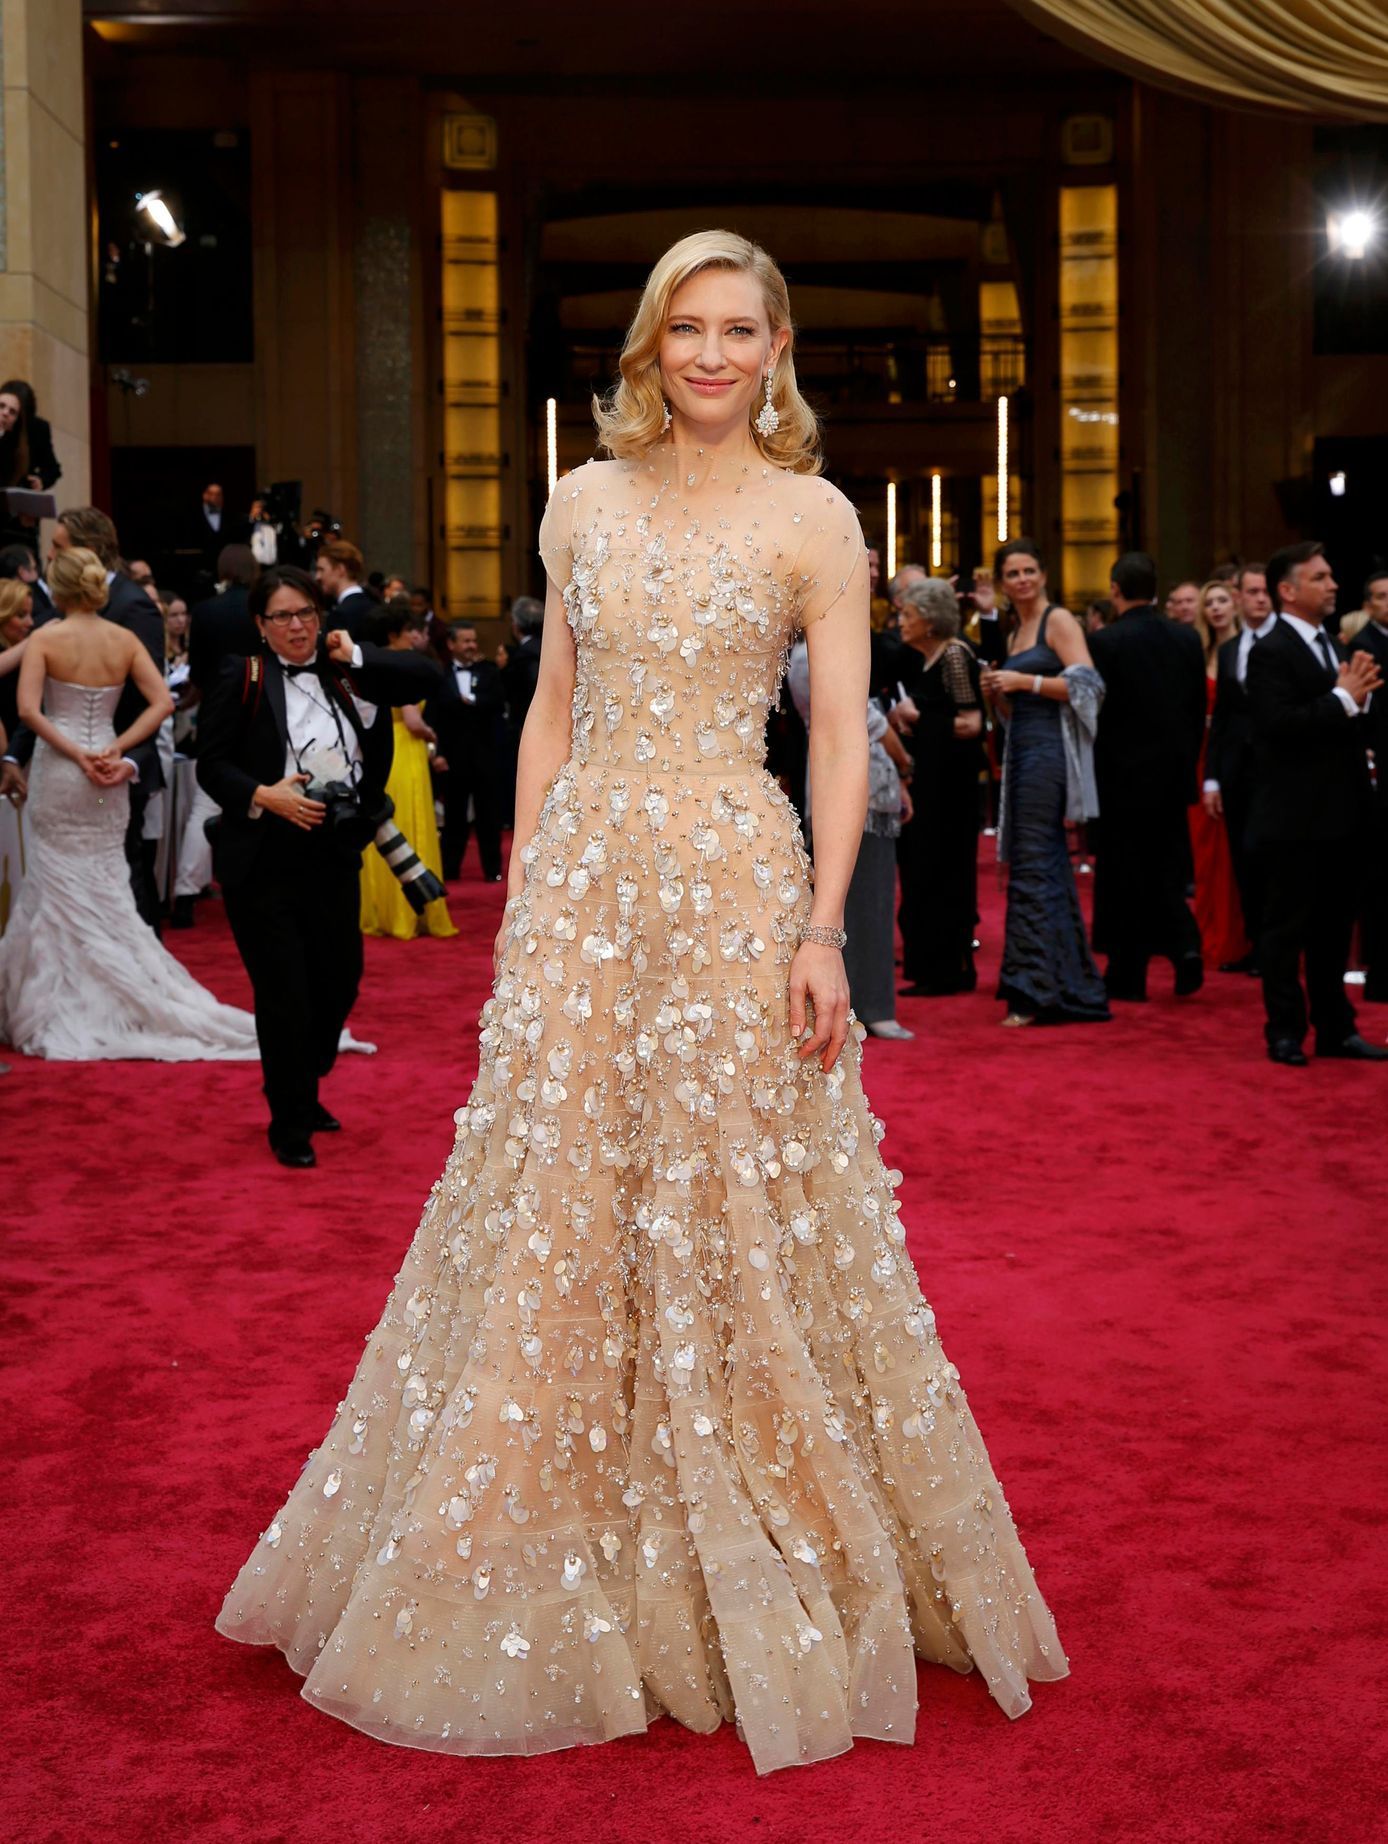 Cate Blanchett best actress nominee for her role in &quot;Blue Jasmine&quot; arrives on the red carpet at the 86th Academy Awards in Hollywood